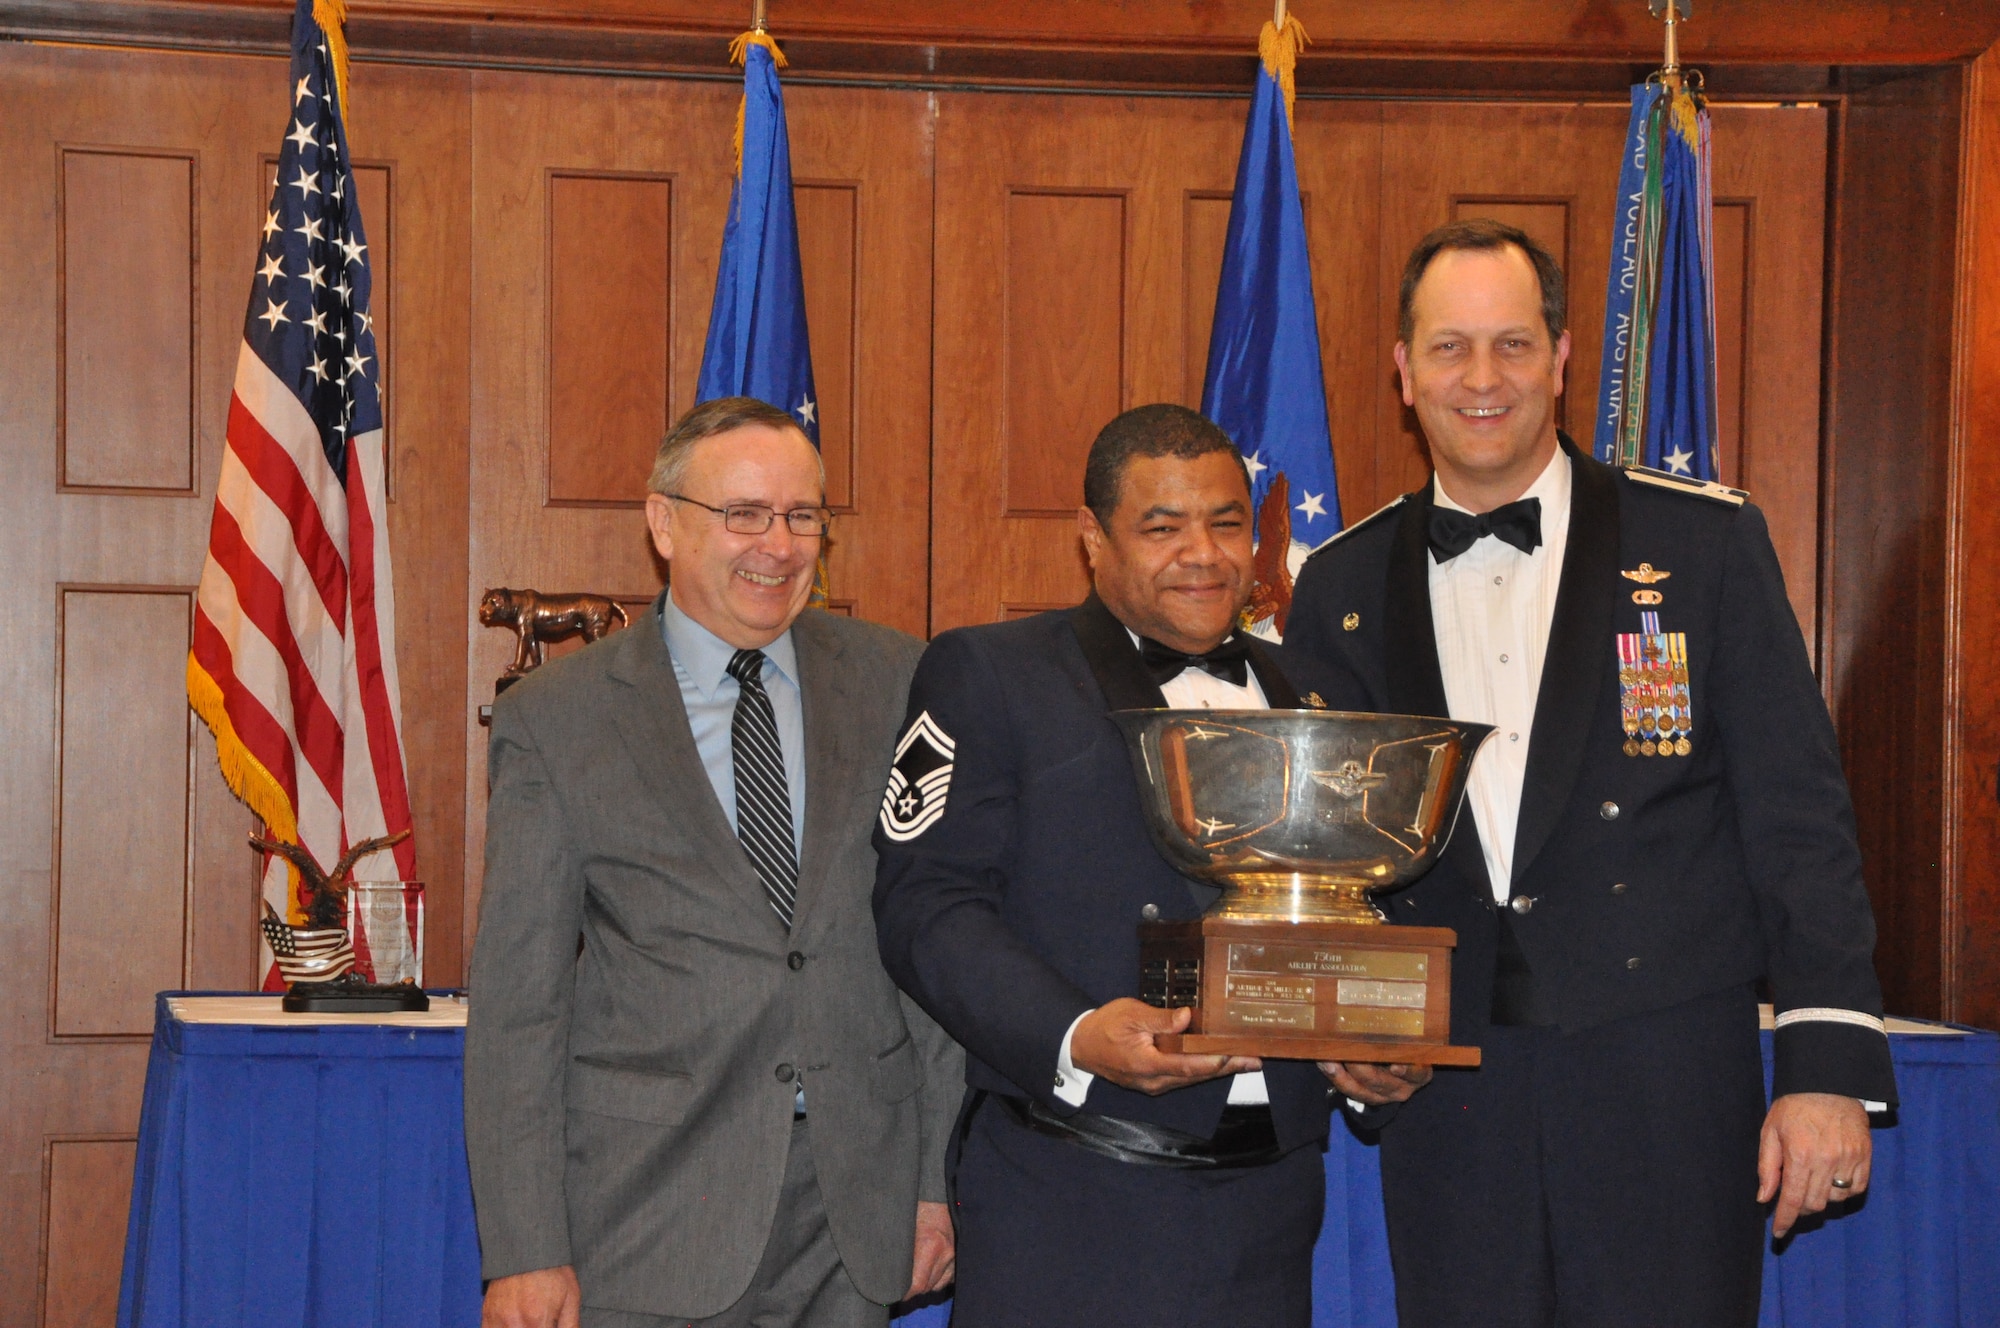 Senior Master Sgt. WIlliam Gray, 756th Air Refueling Squadron, wins the 459th Wing Association's Paul R. Julian, Jr., Award for Excellence in Aviation at the 459 ARW Annual Awards Banquet on Saturday, March 7, 2015. He is flanked by association president, Mr. Tim McConnell, and his commander, Col. Michael Moeding, 459 Operations Group. (Air Force Photo / SrA Kristin Kurtz)
